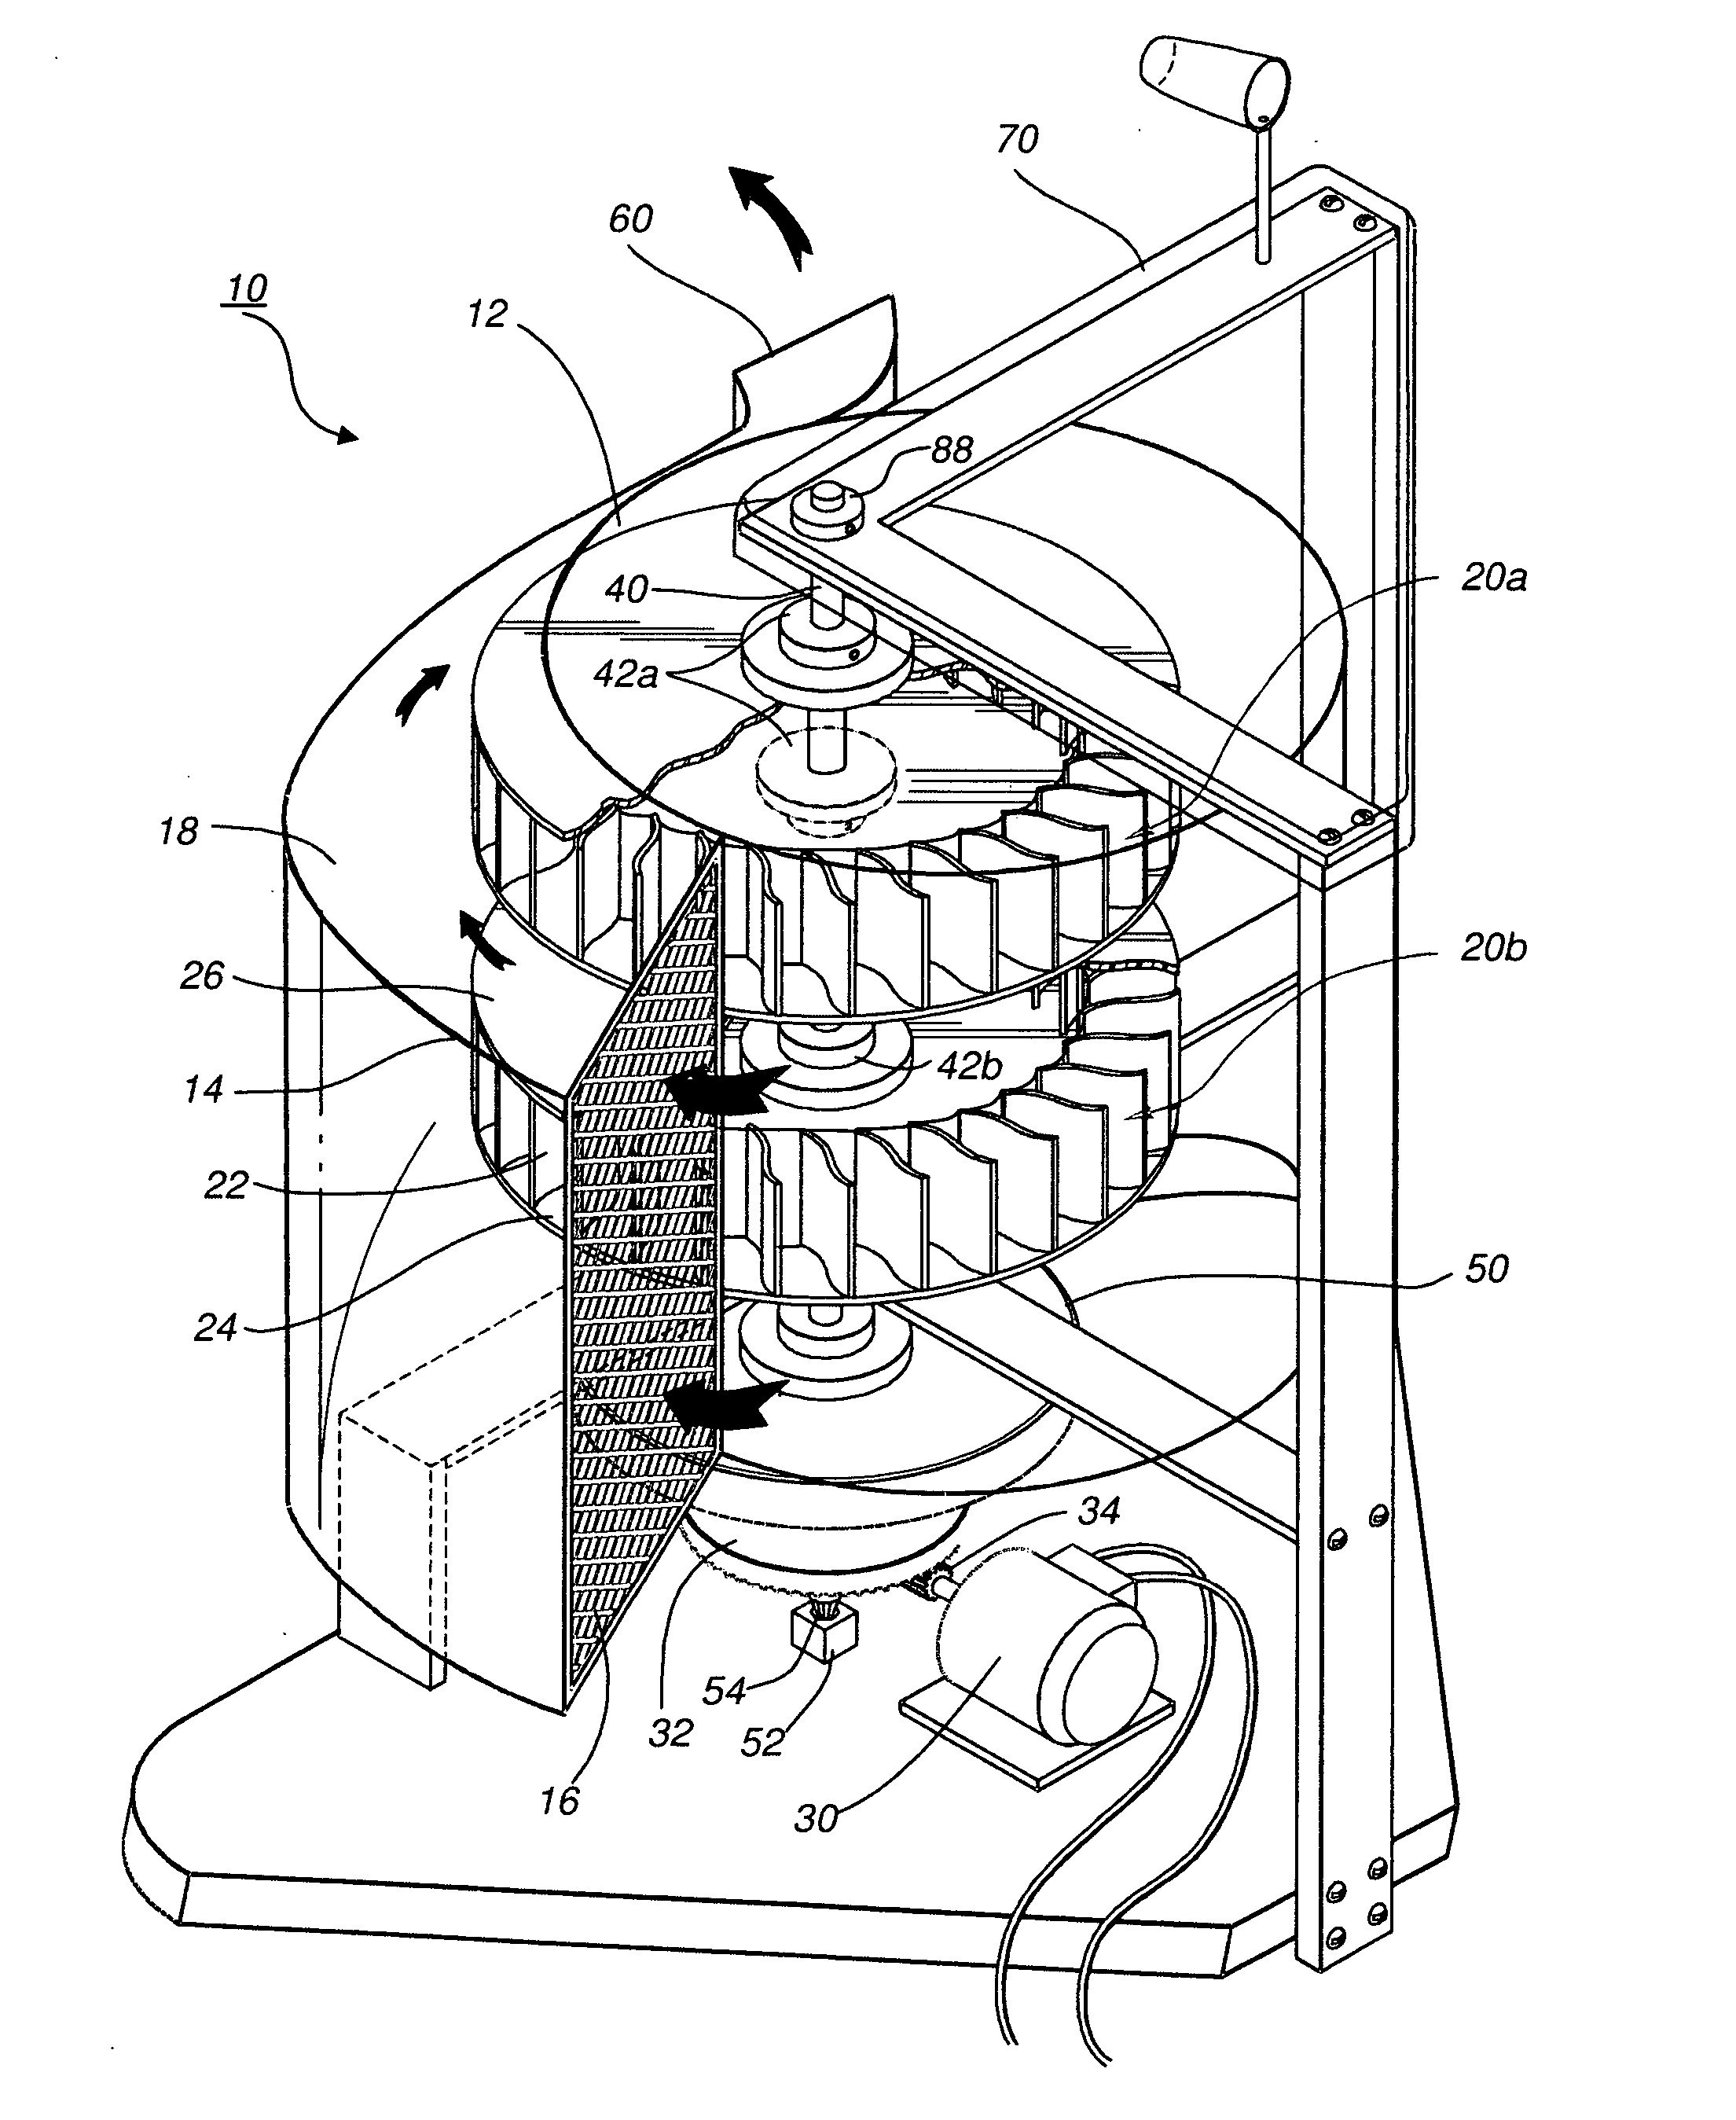 Protective wind energy conversion chamber